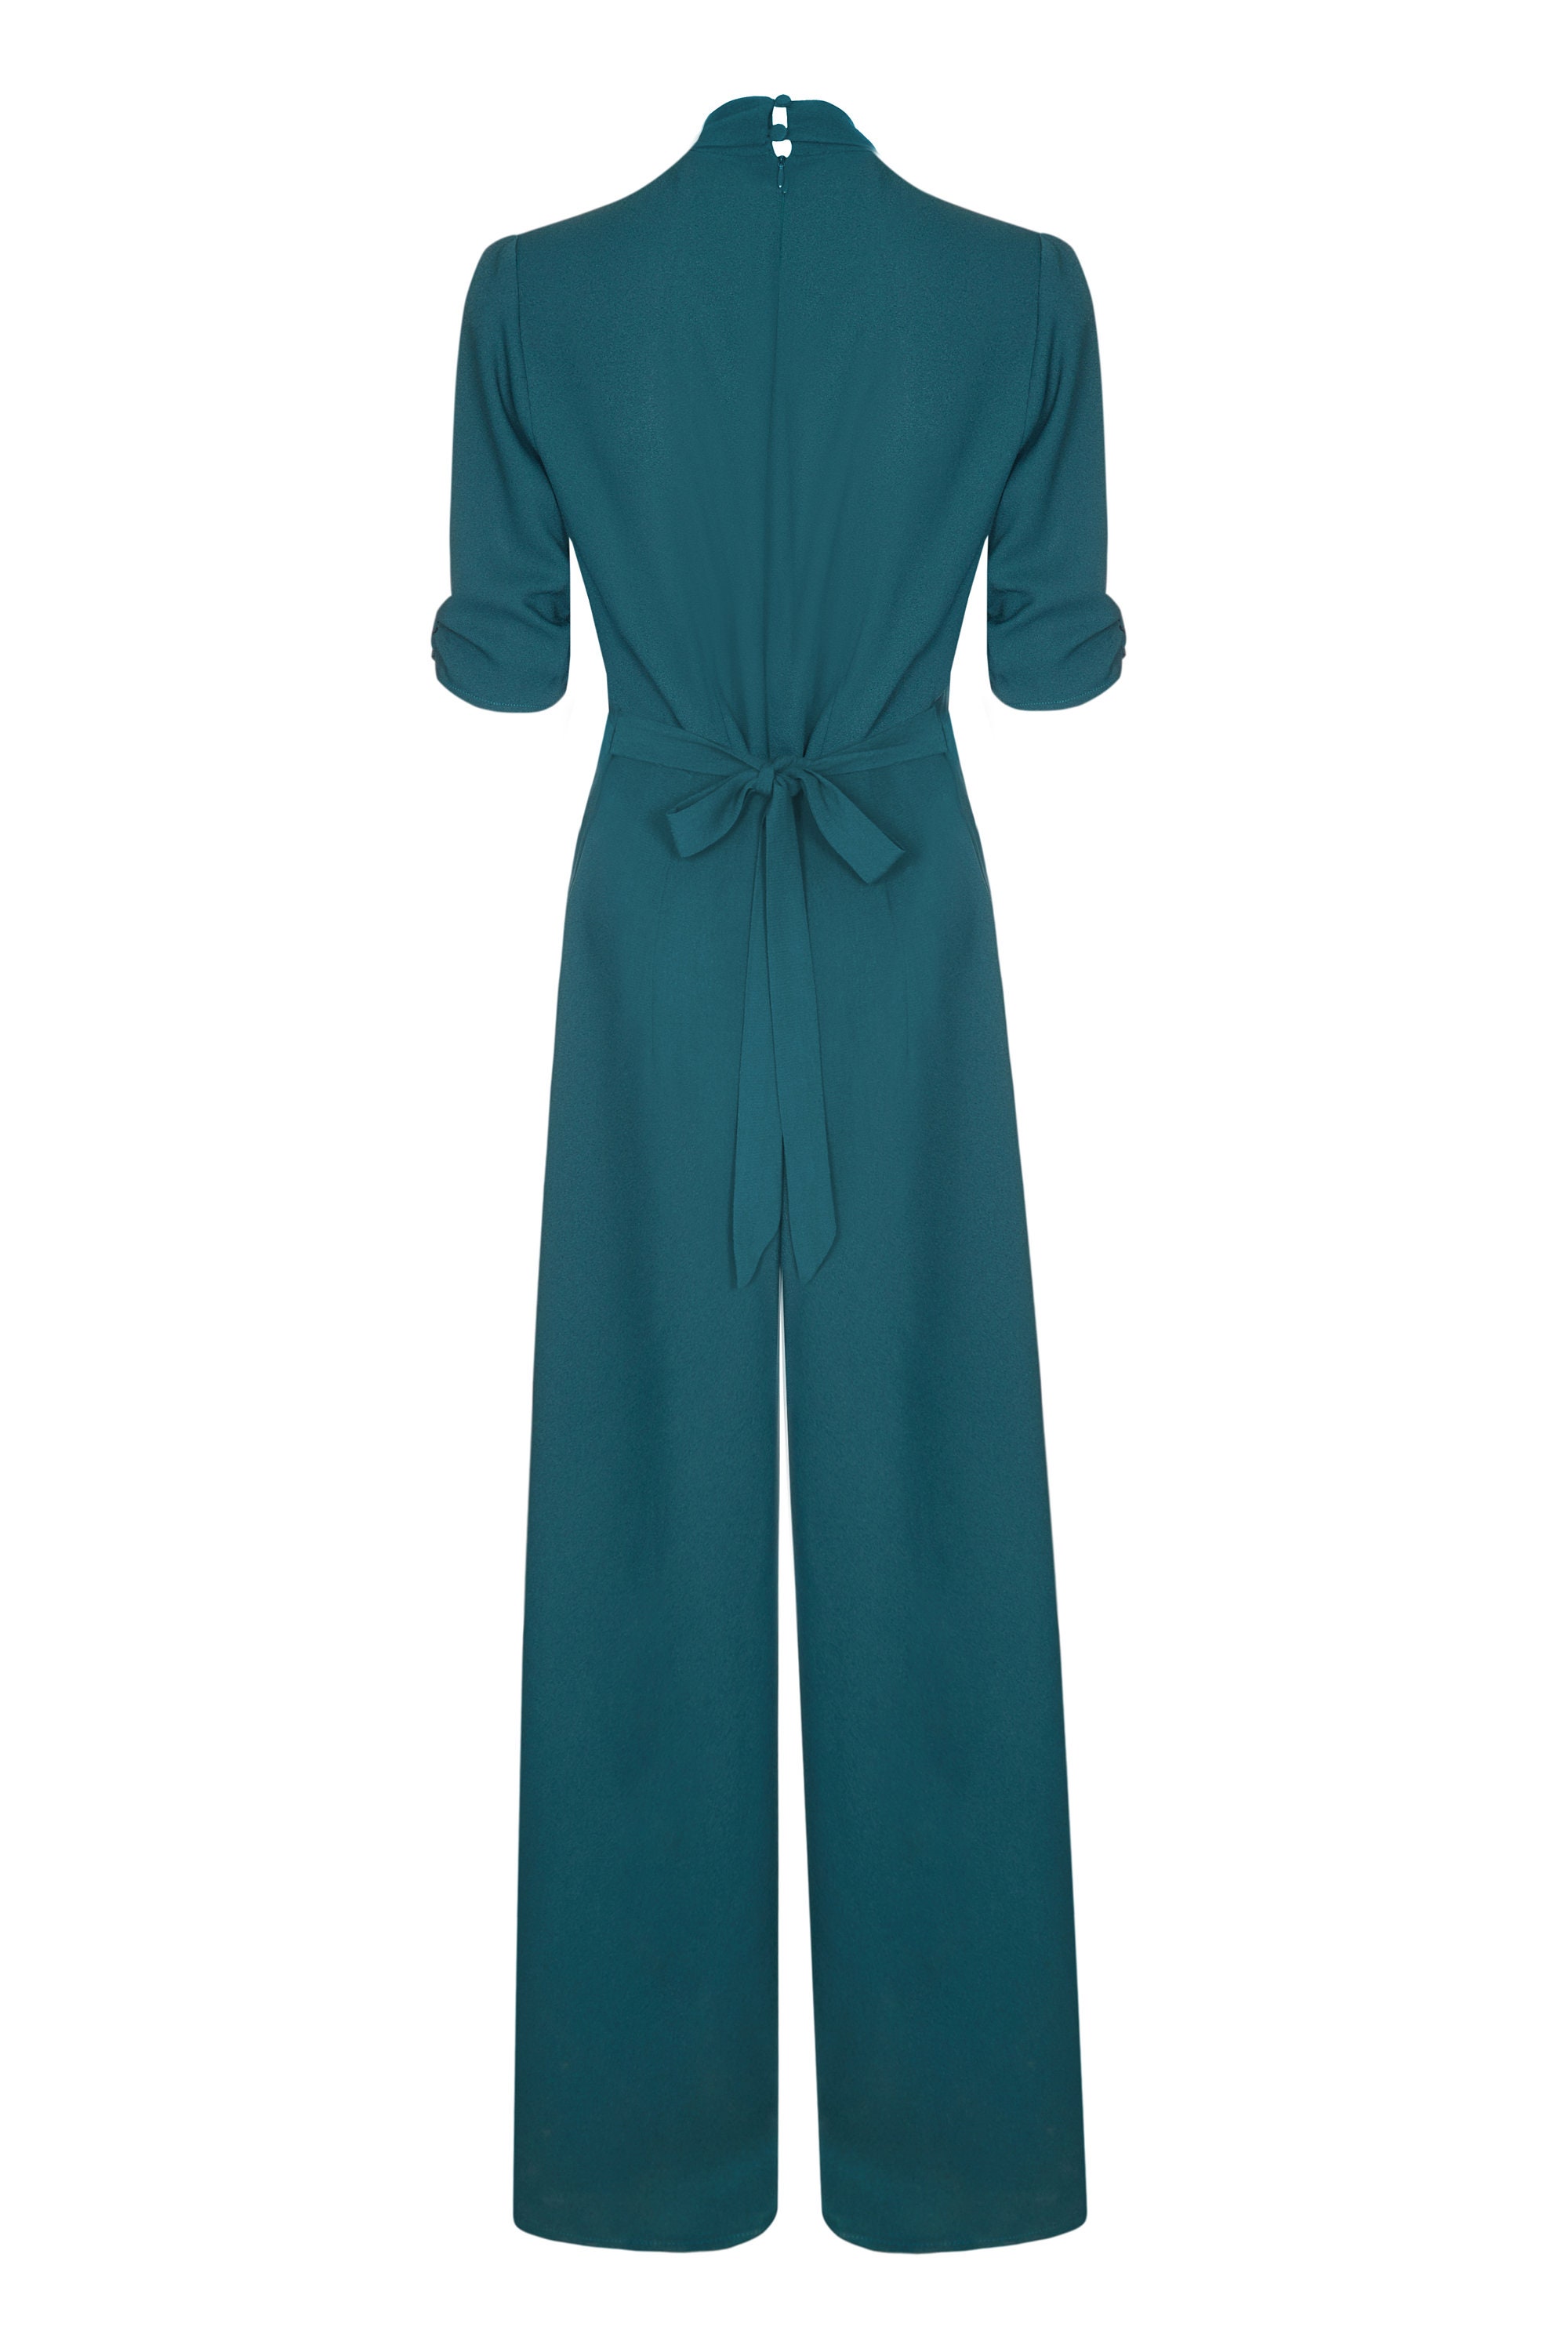 Vintage style jumpsuit in emerald crepe with flattering | Etsy